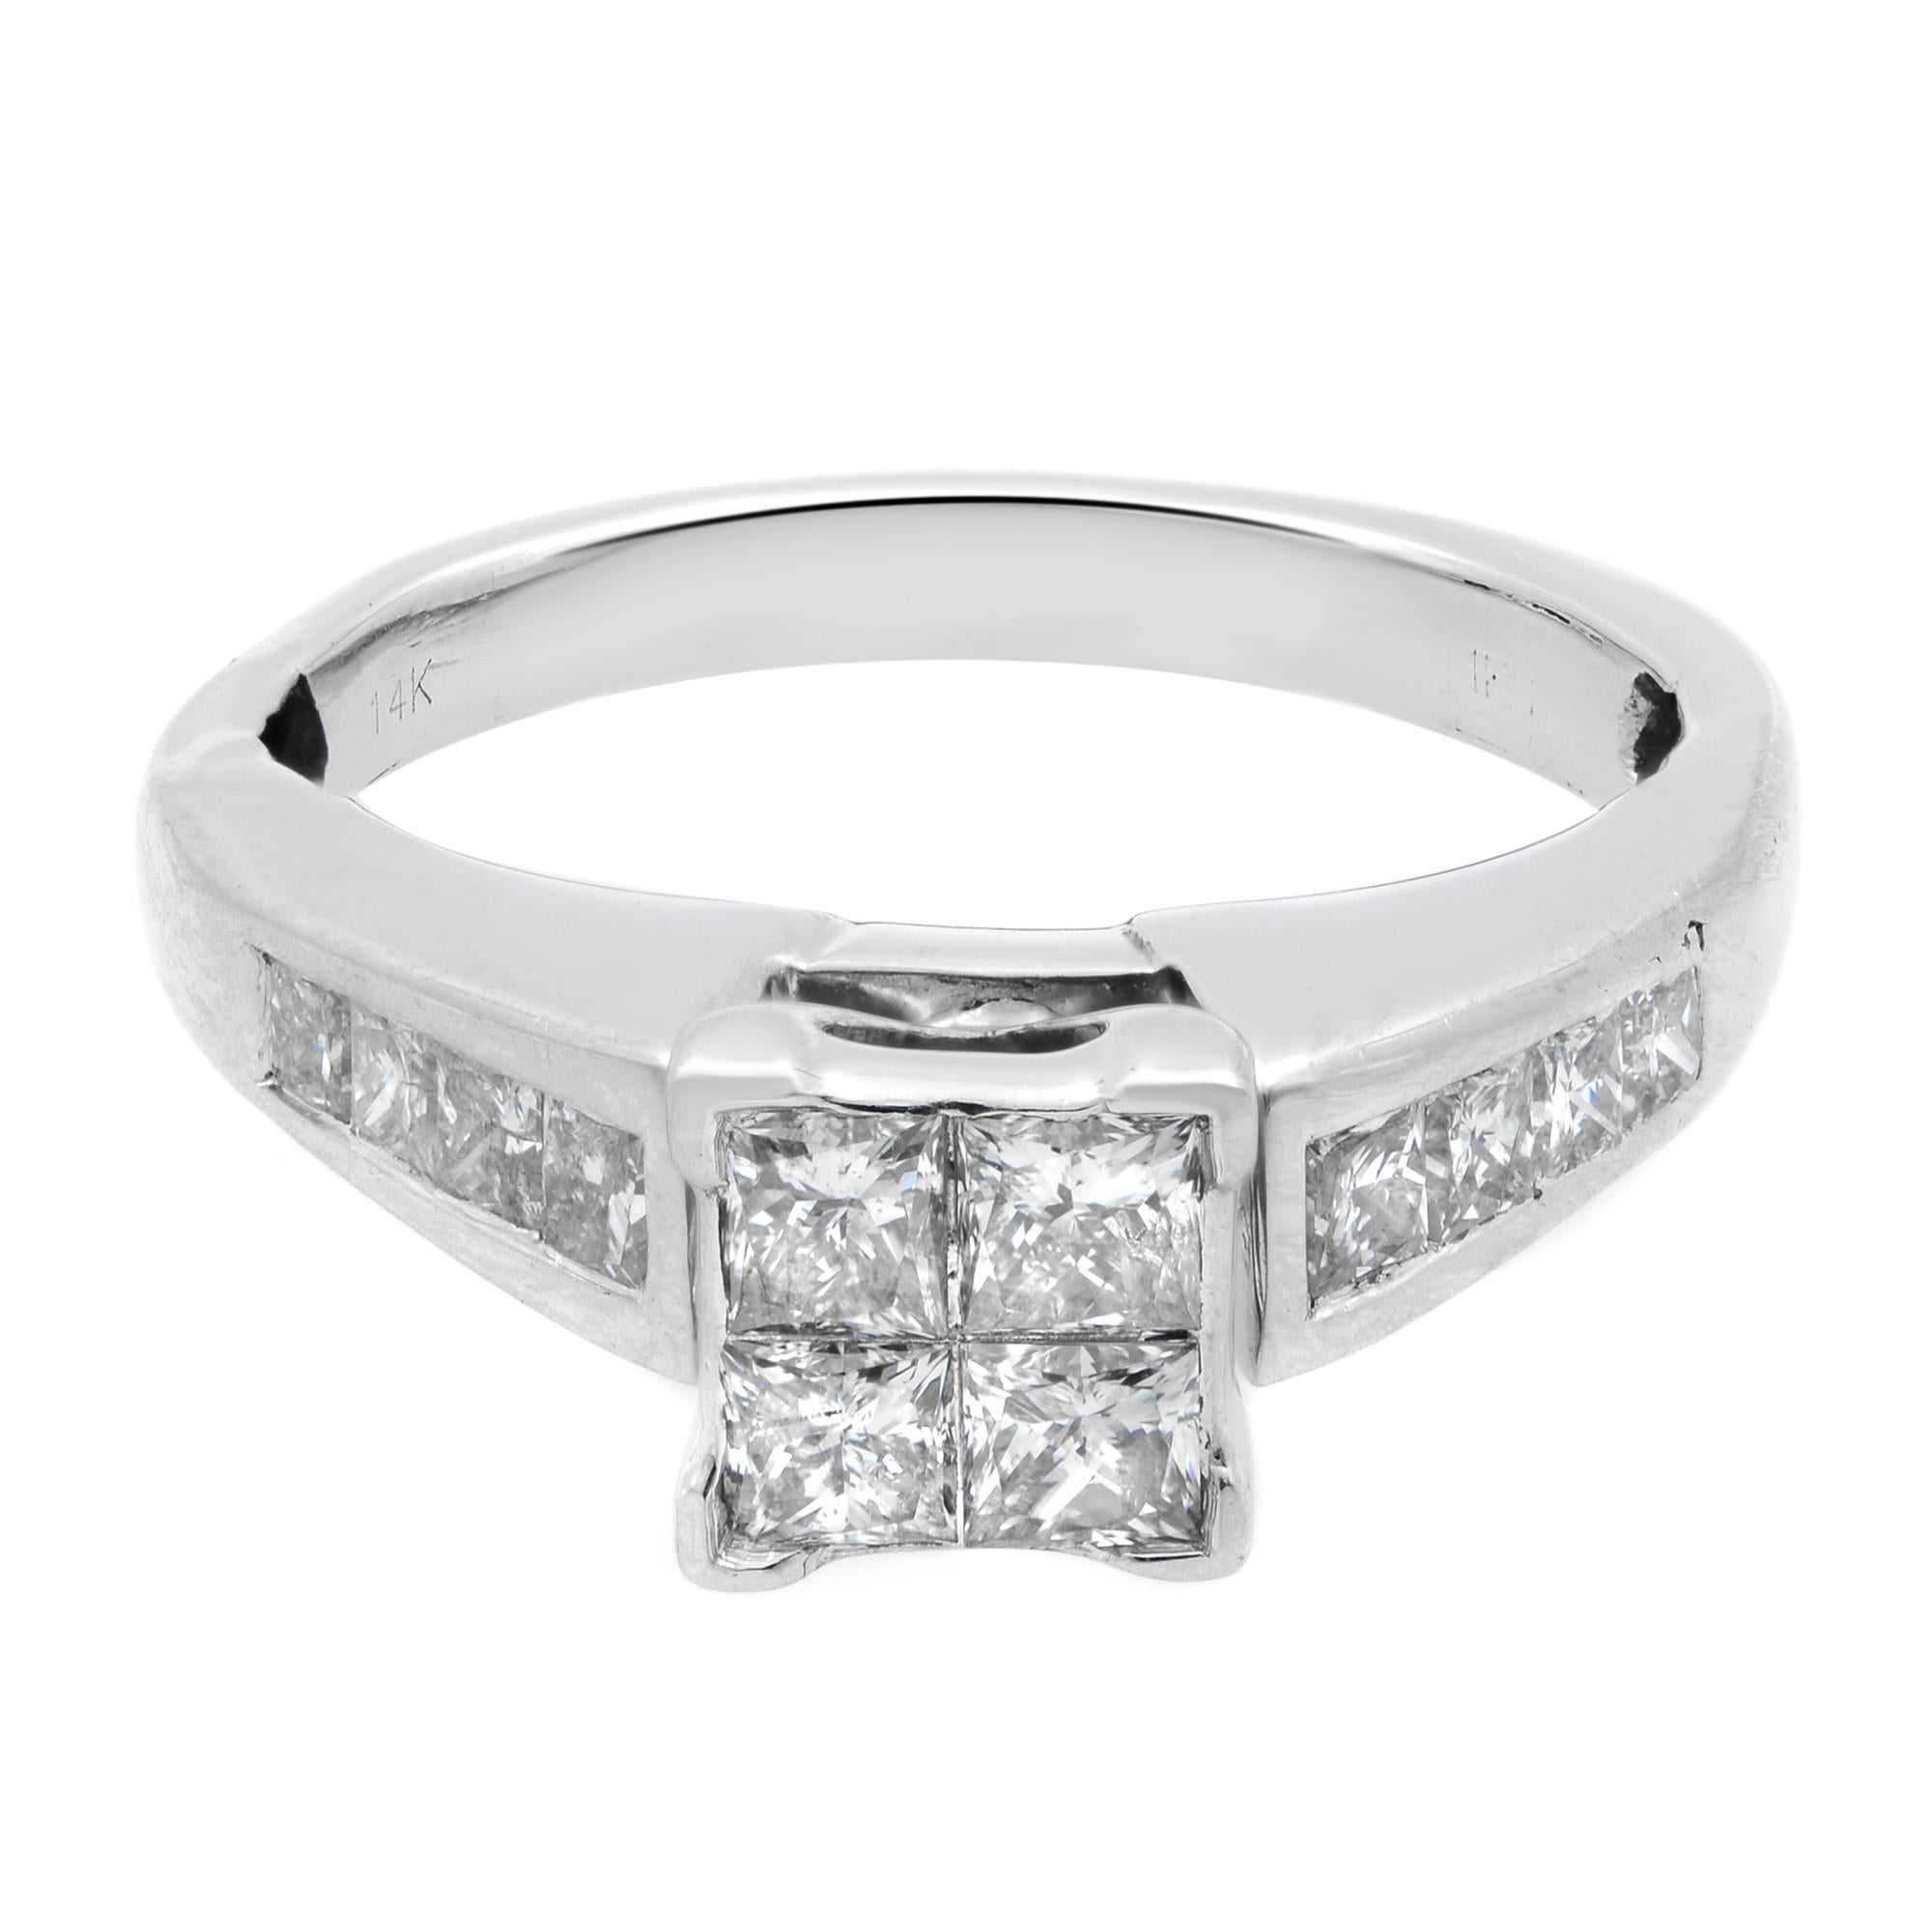 This stunning engagement ring is crafted in 14k white gold. It features 4 princess cut diamonds encrusted in a center square shaped shank in an invisible setting giving an illusion of a bigger size diamond with channel set princess cut diamonds on